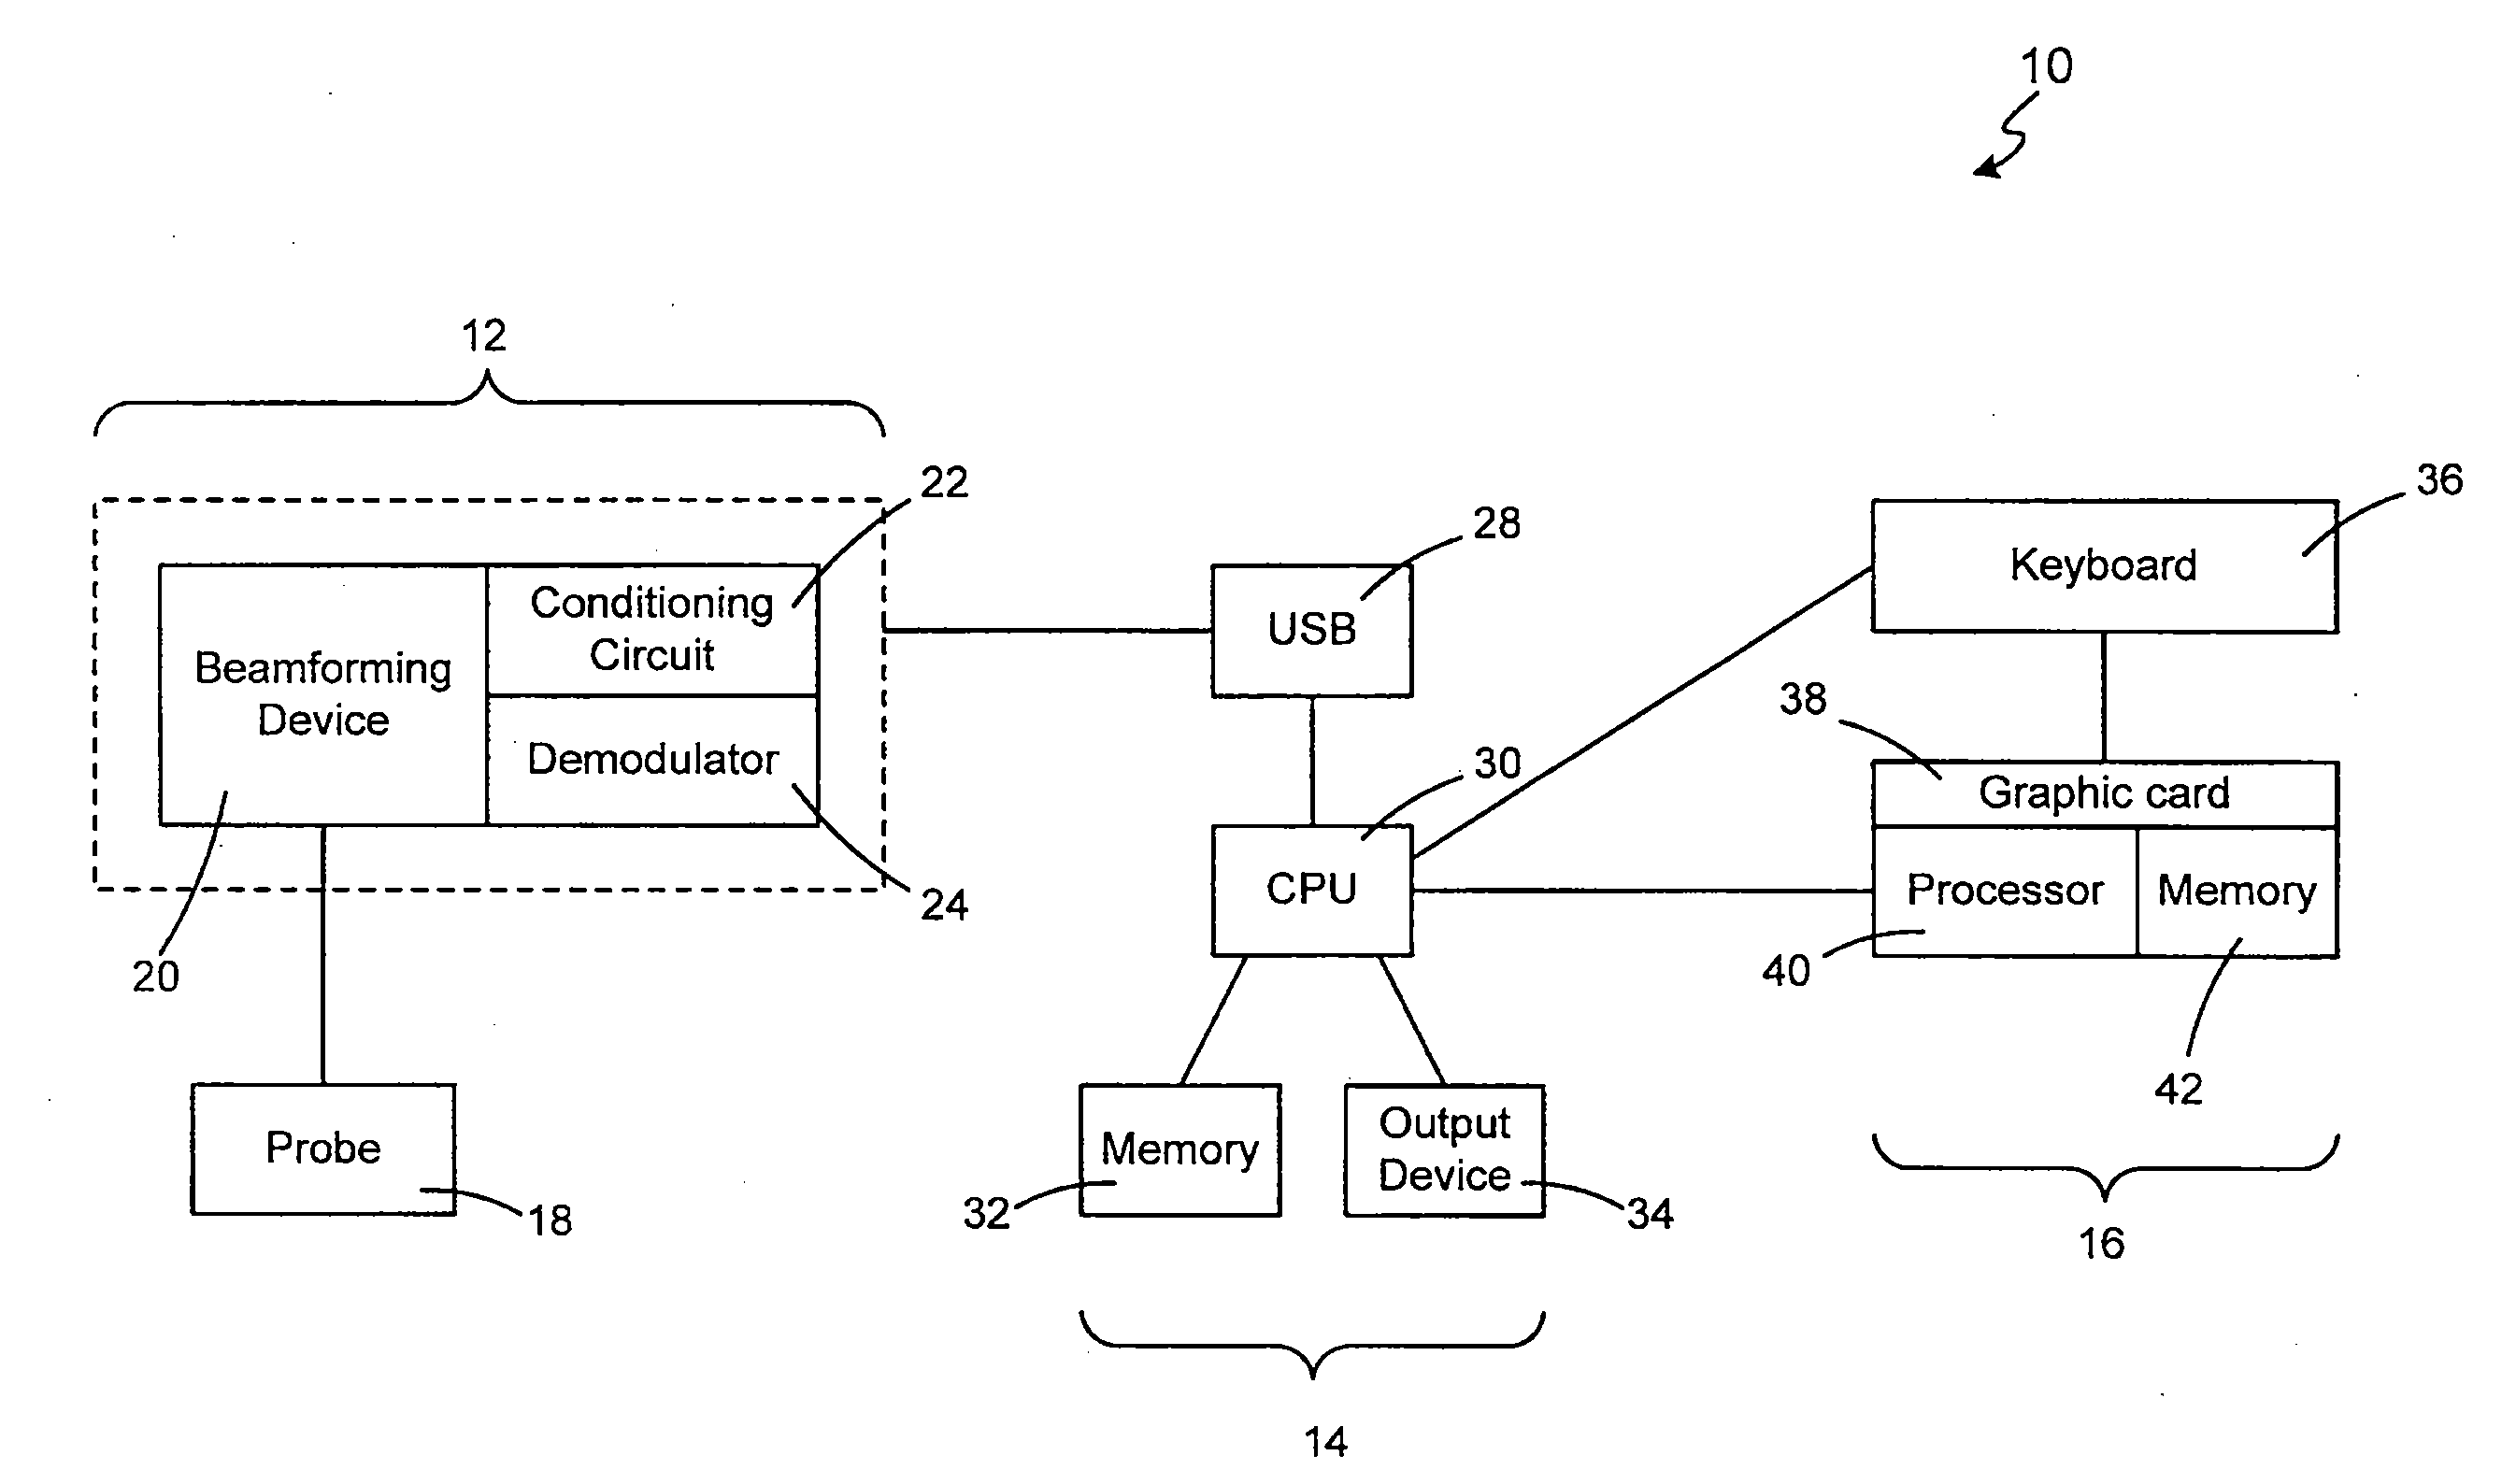 Ultrasound system and method for imaging and/or measuring displacement of moving tissue and fluid